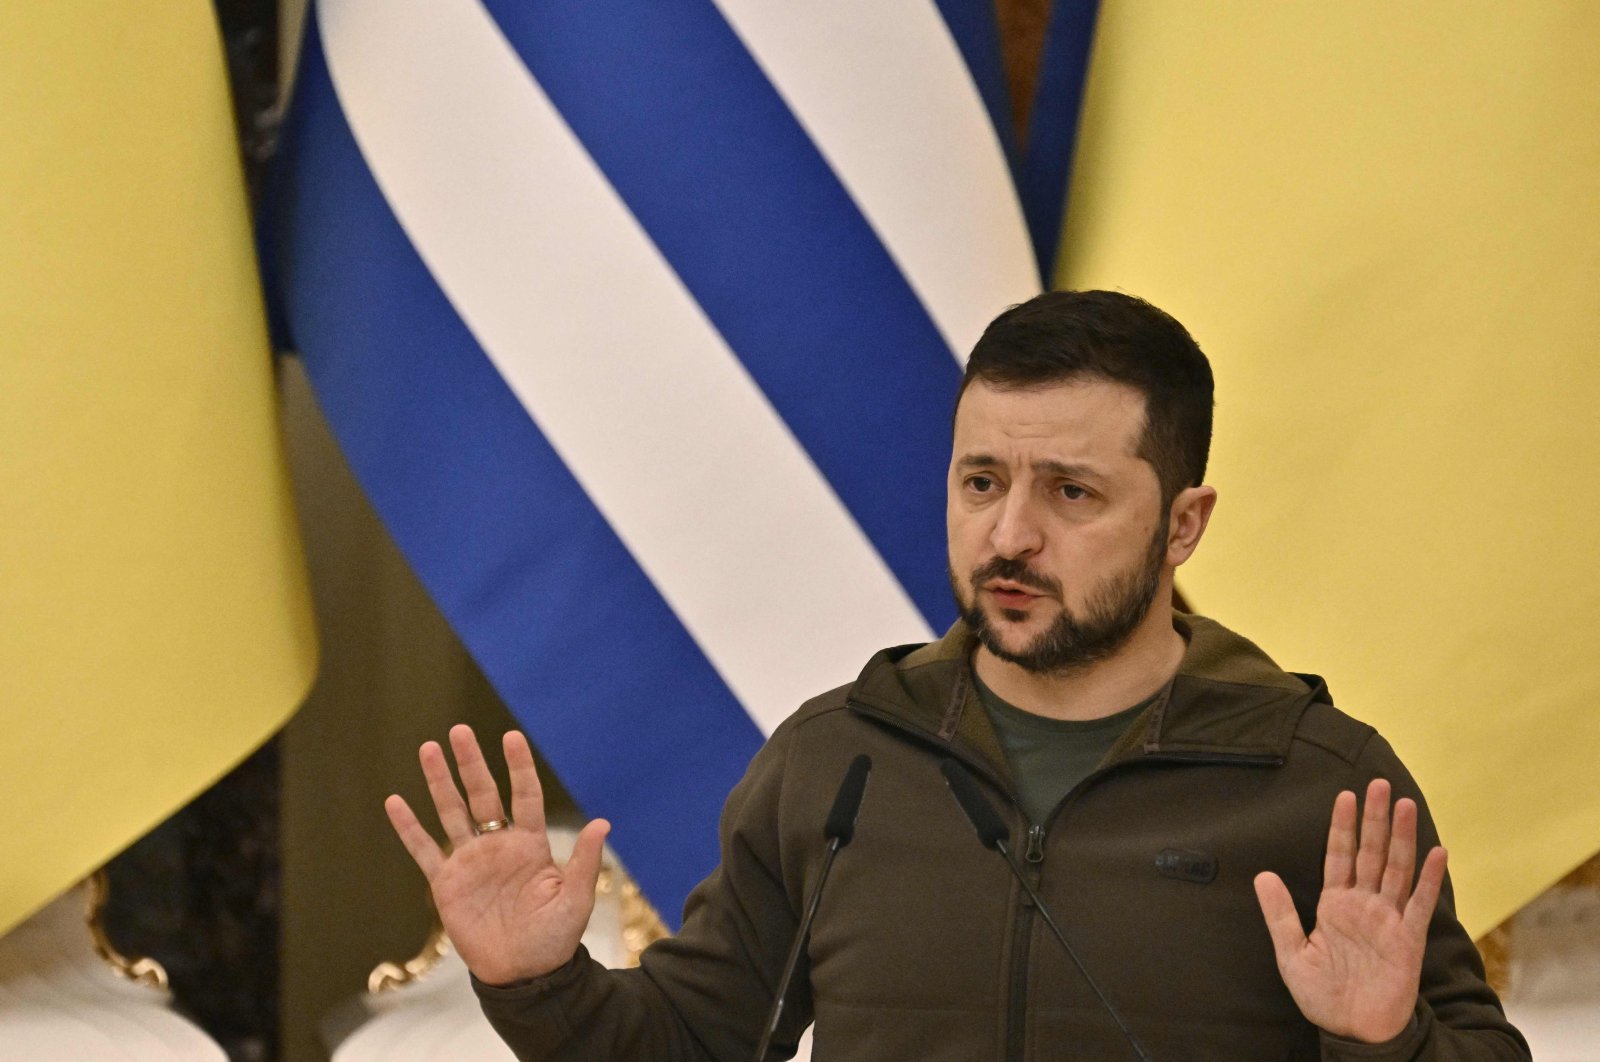 Ukraine&#039;s President Volodymyr Zelenskyy speaks during a joint news conference with Greek President Katerina Sakellaropoulou (not pictured) following their meeting in Kyiv, Ukraine, Nov. 3, 2022. (AFP Photo)